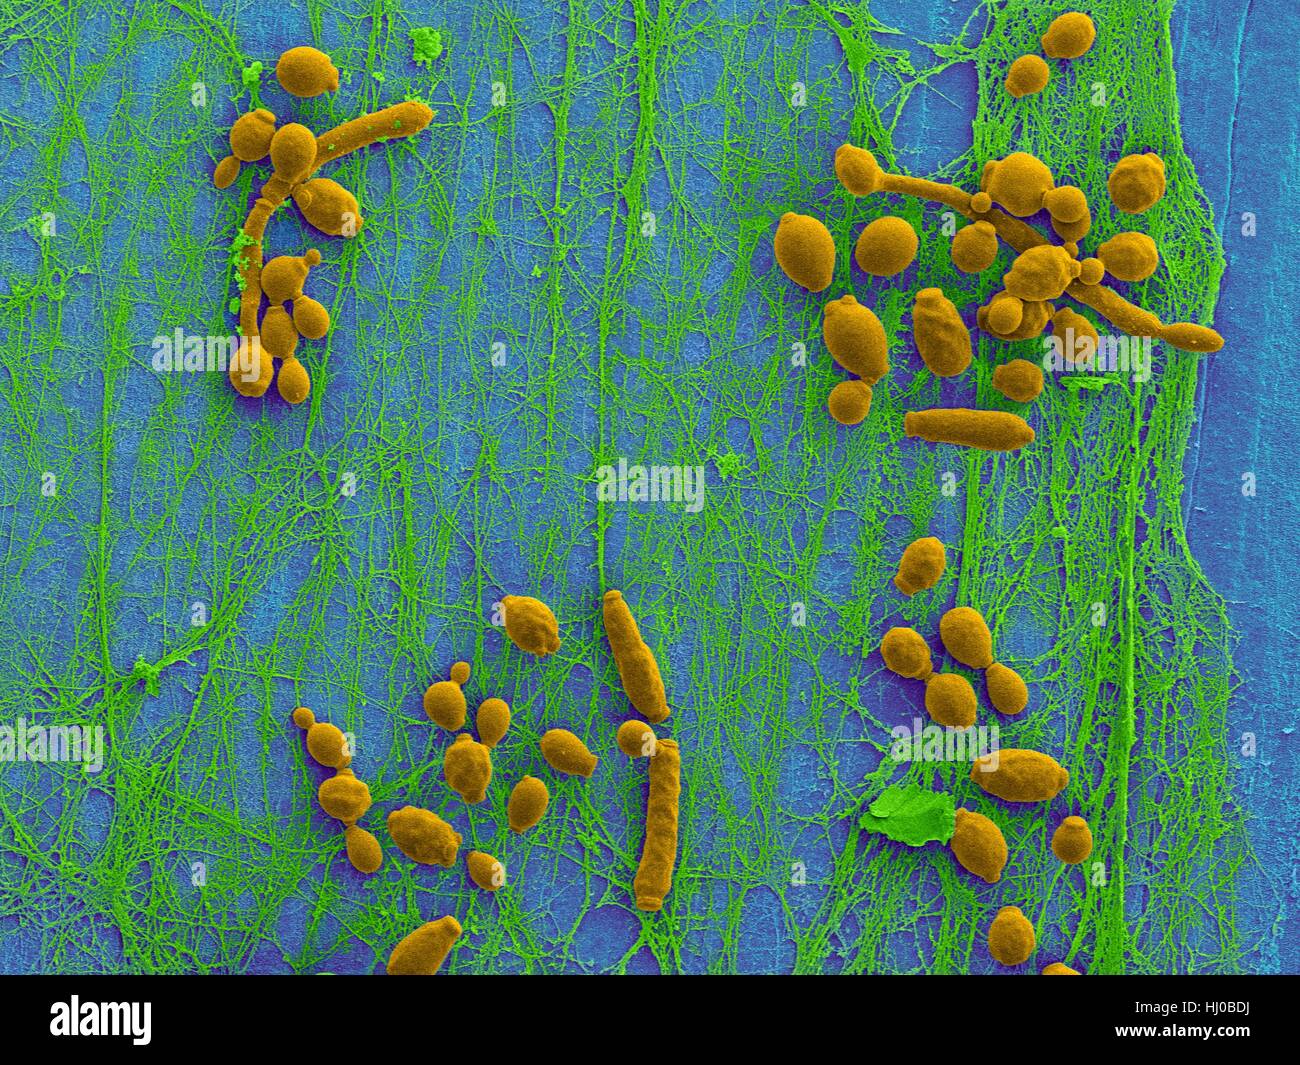 Coloured scanning electron micrograph (SEM) of Candida albicans infected medical catheter.A common yeast,C.albicans can colonize catheters resulting in serious tissue infections.Shown here is inner surface of infected catheter (removed from patient) revealing yeast biofilm (Candida Stock Photo